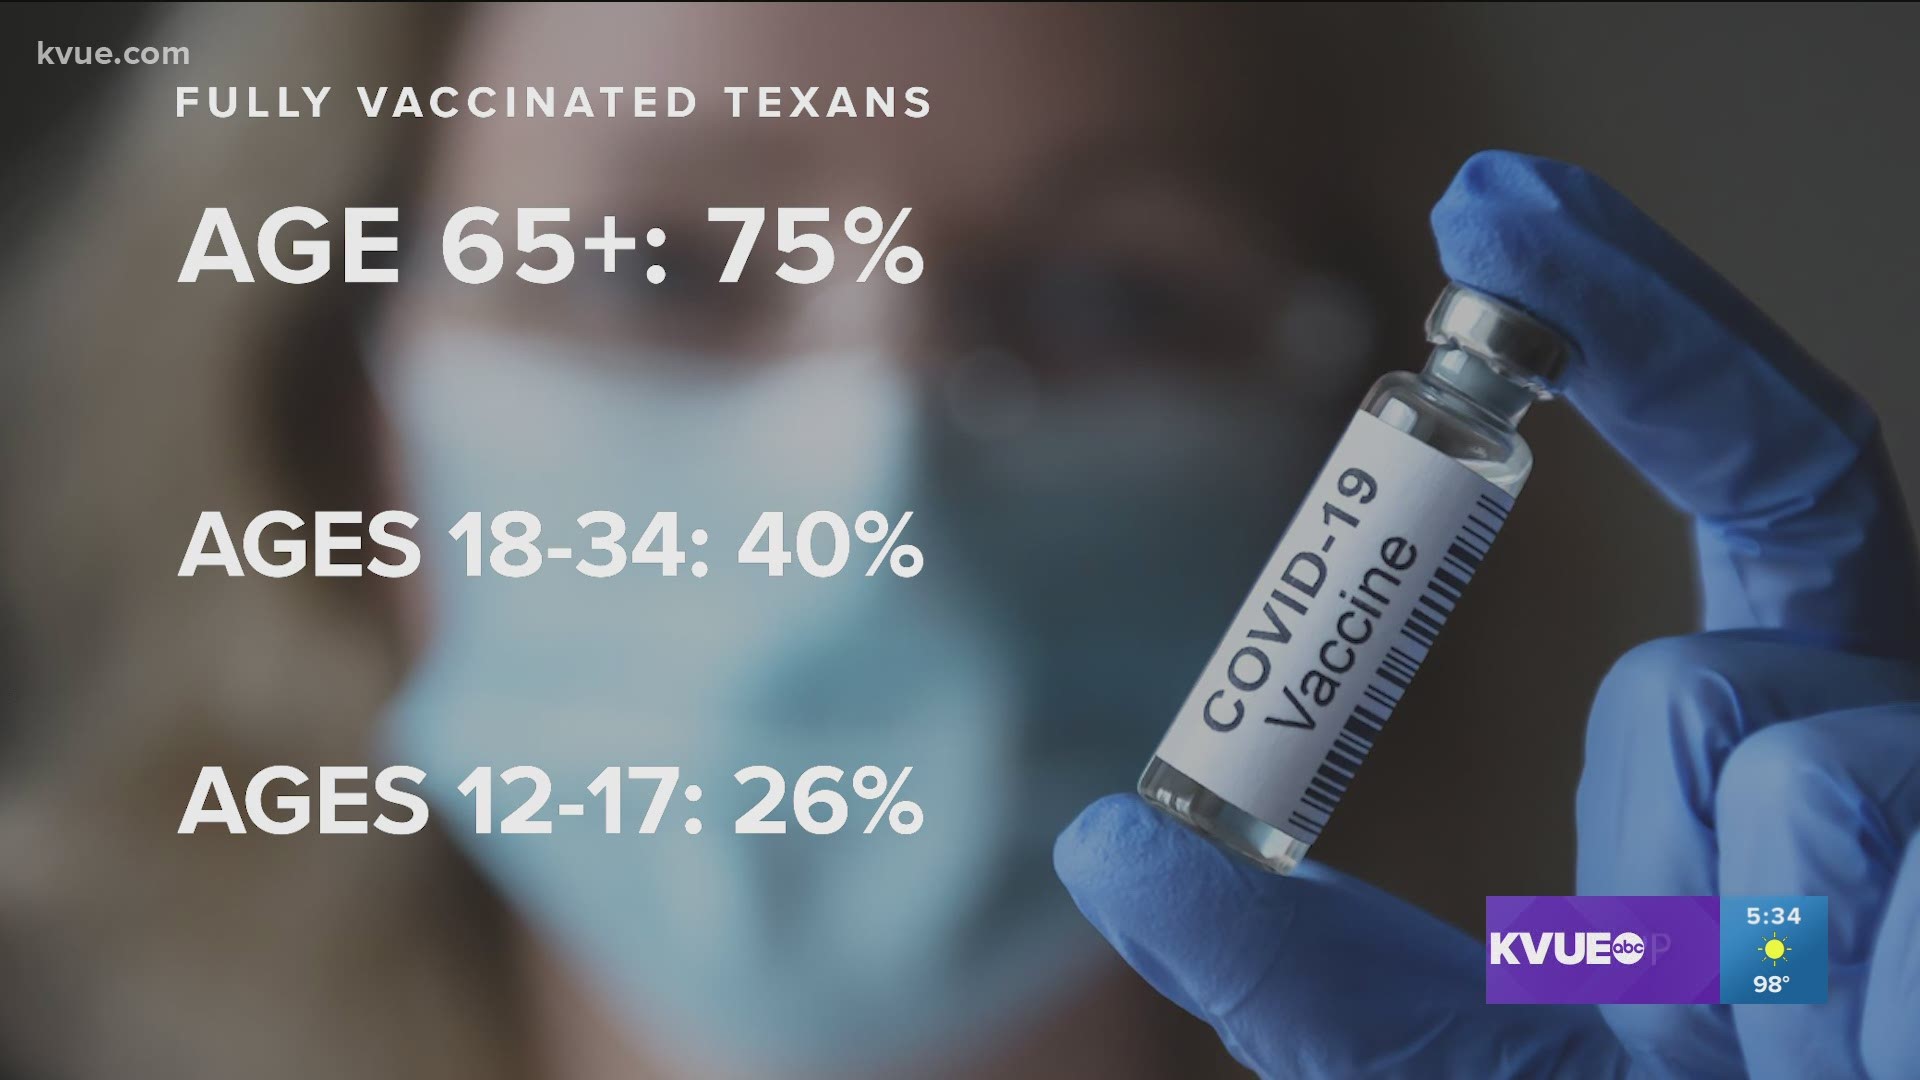 With the delta variant now infecting people across Texas, there's an even bigger push to get more people vaccinated.